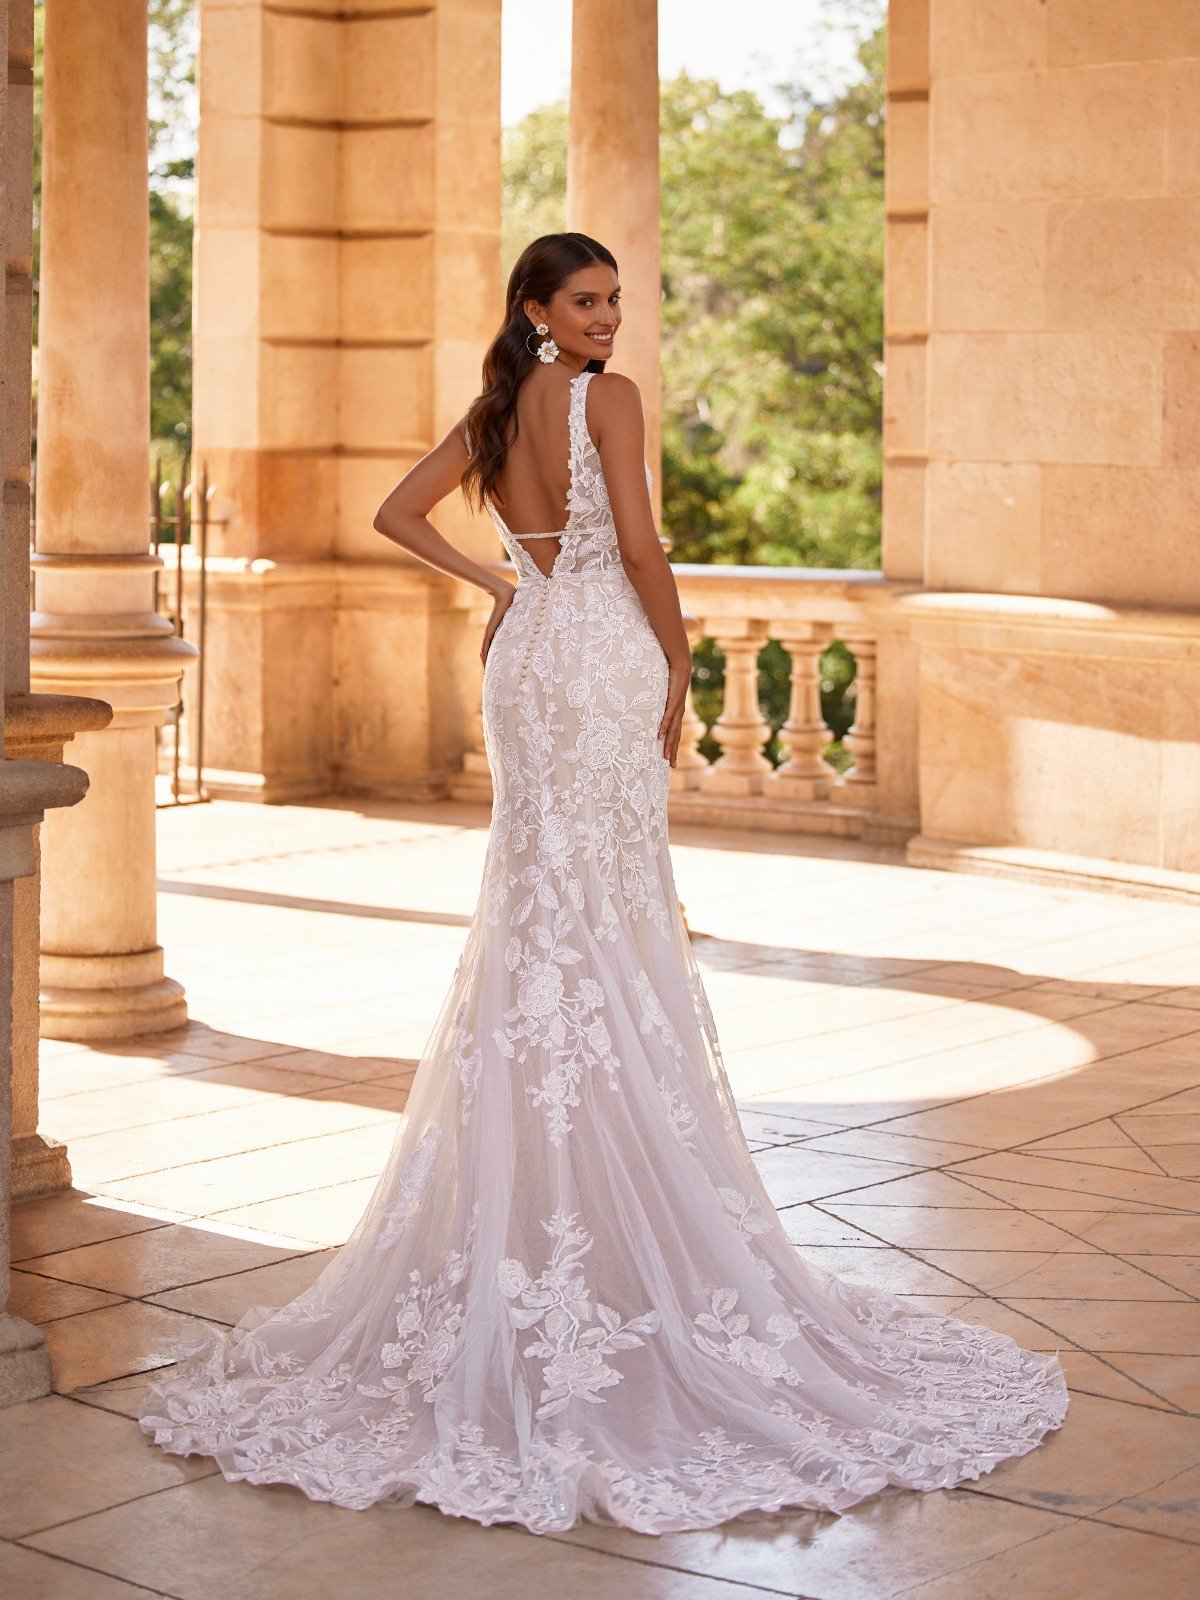 Flirty Lace Fit-and-Flare Wedding Dress with Deep Plunging Neckline